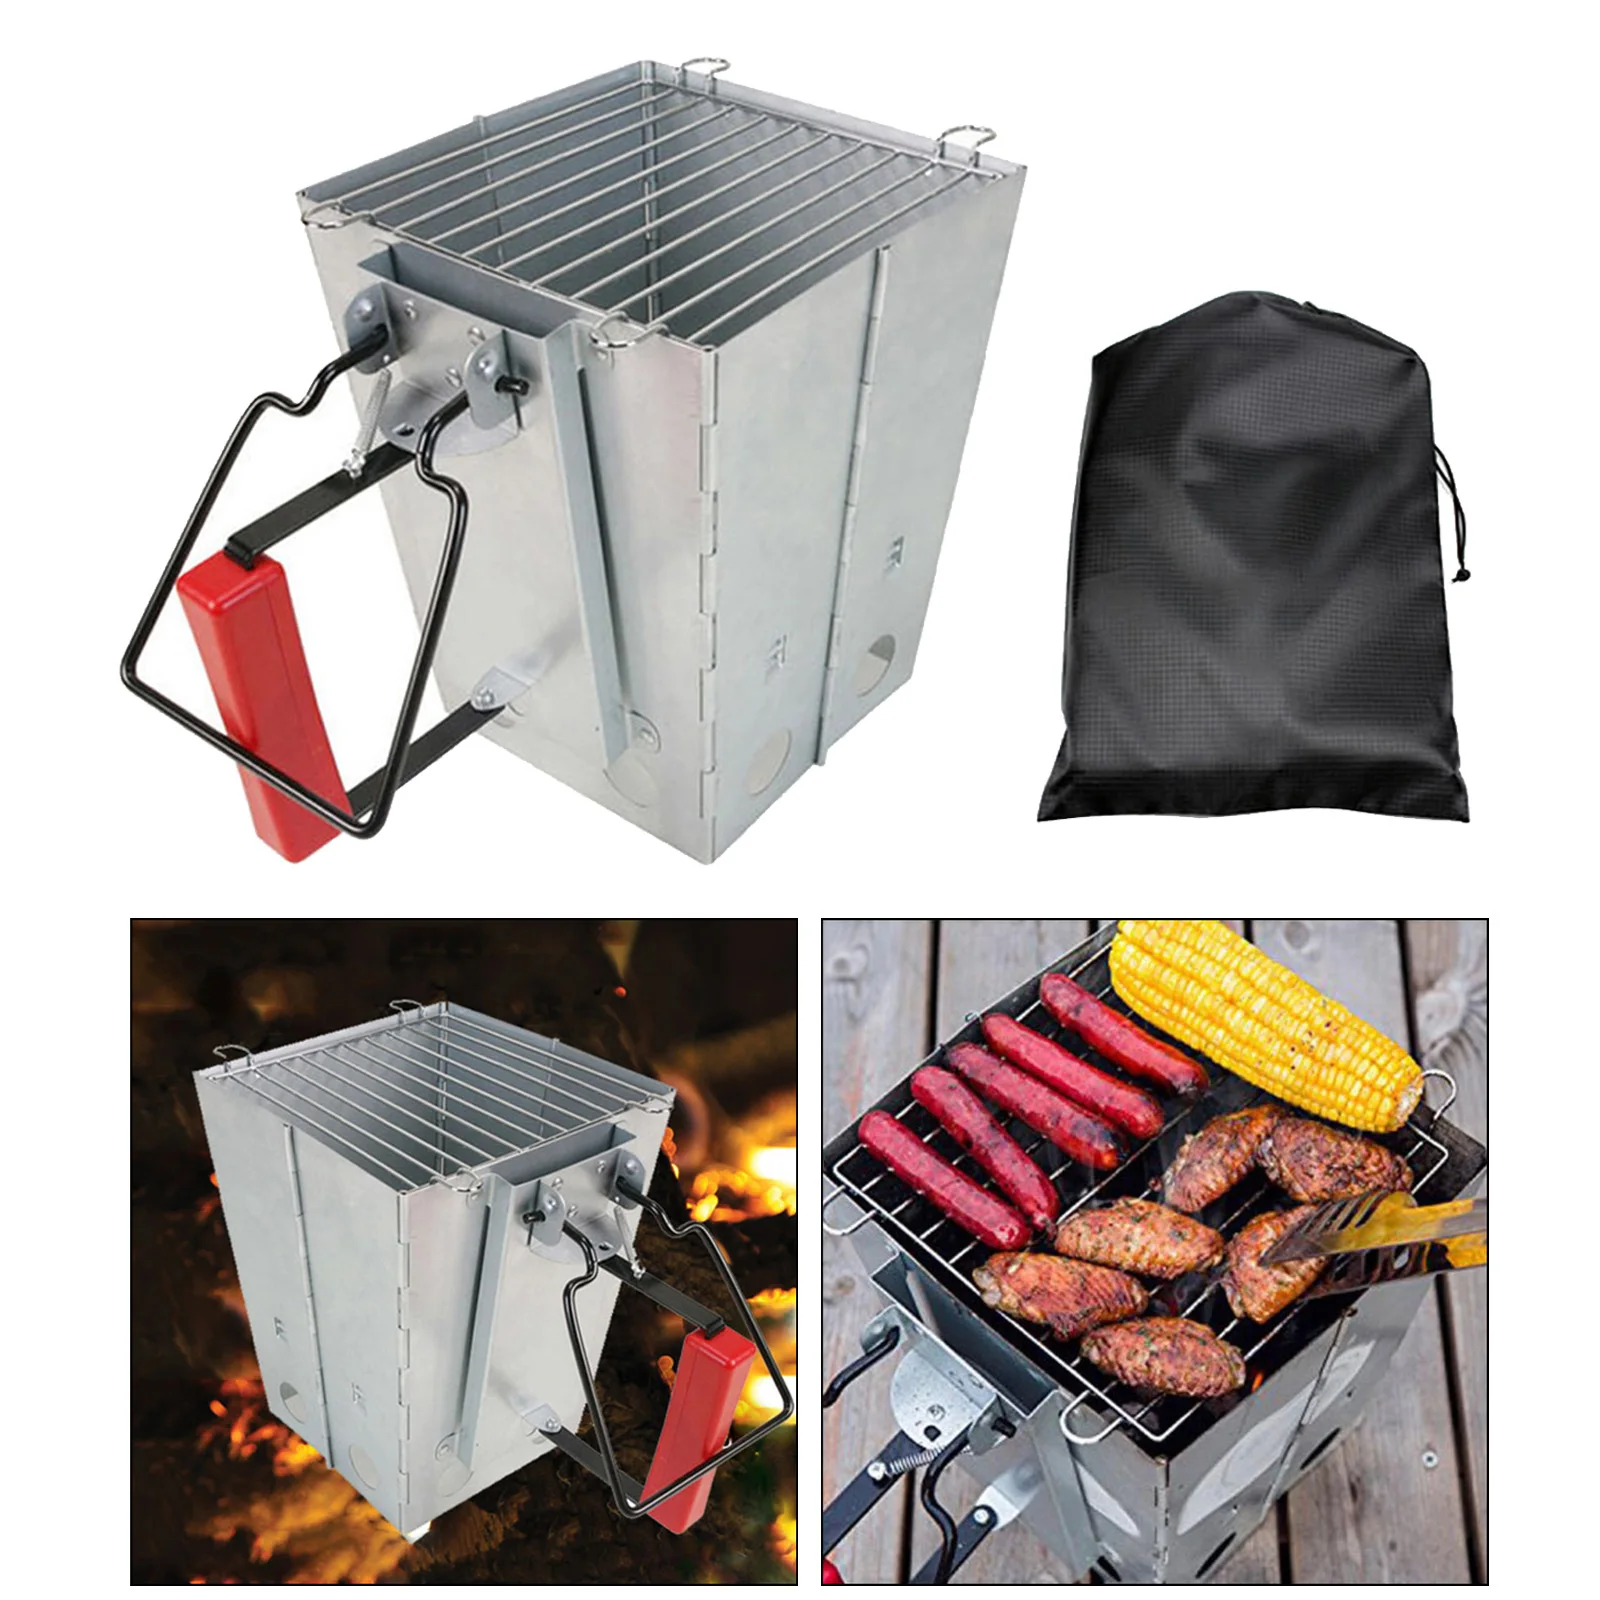 Charcoal Chimney Starter BBQ Accessory ? Galvanised Iron Charcoal Starter, Collapsible, Easy to Assemble